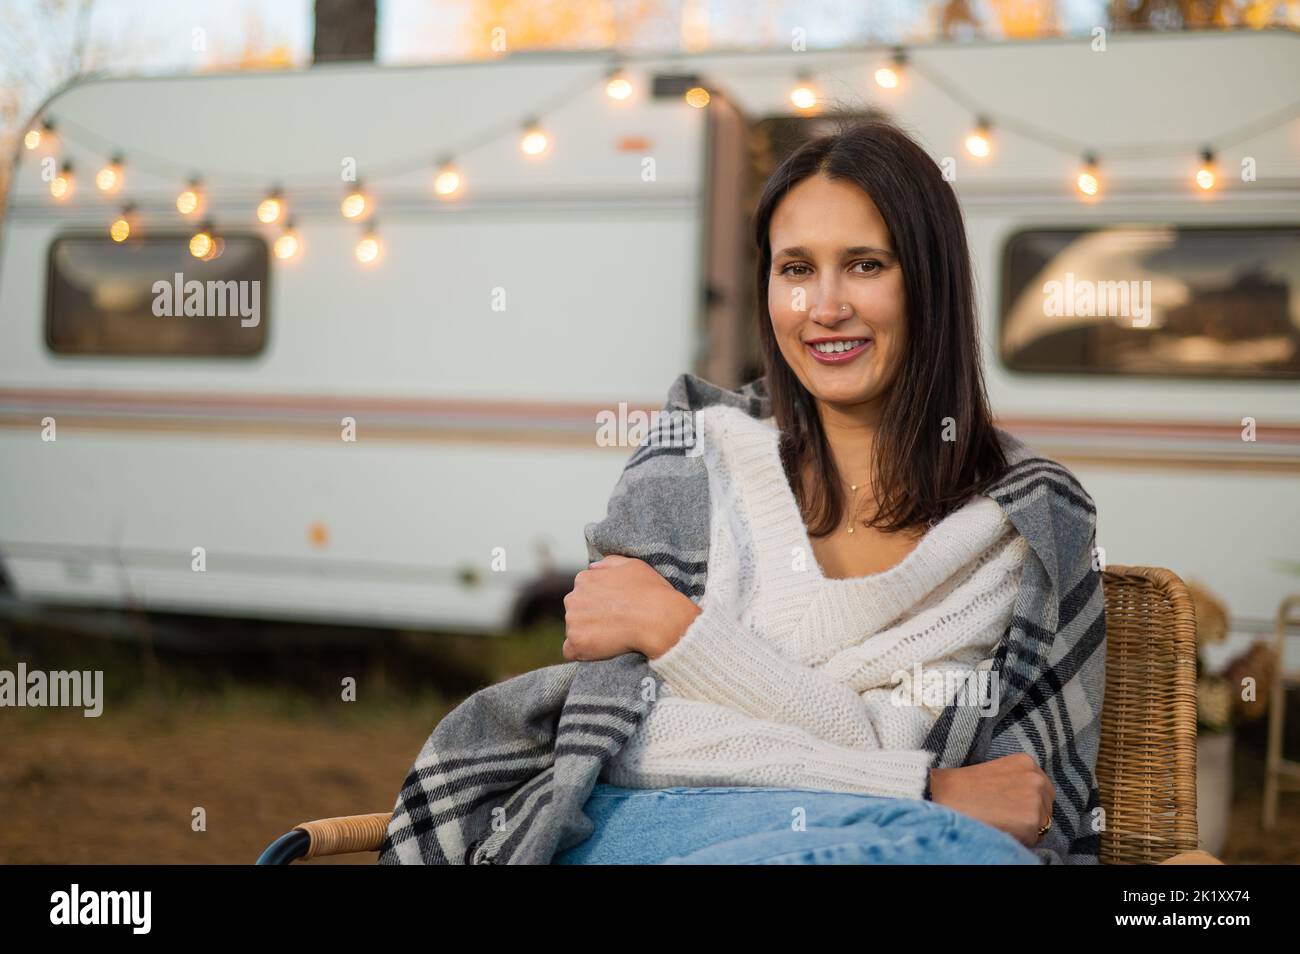 Caucasian woman sits in a wicker chair wrapped in a blanket in the yard near the trailer in autumn.  Stock Photo